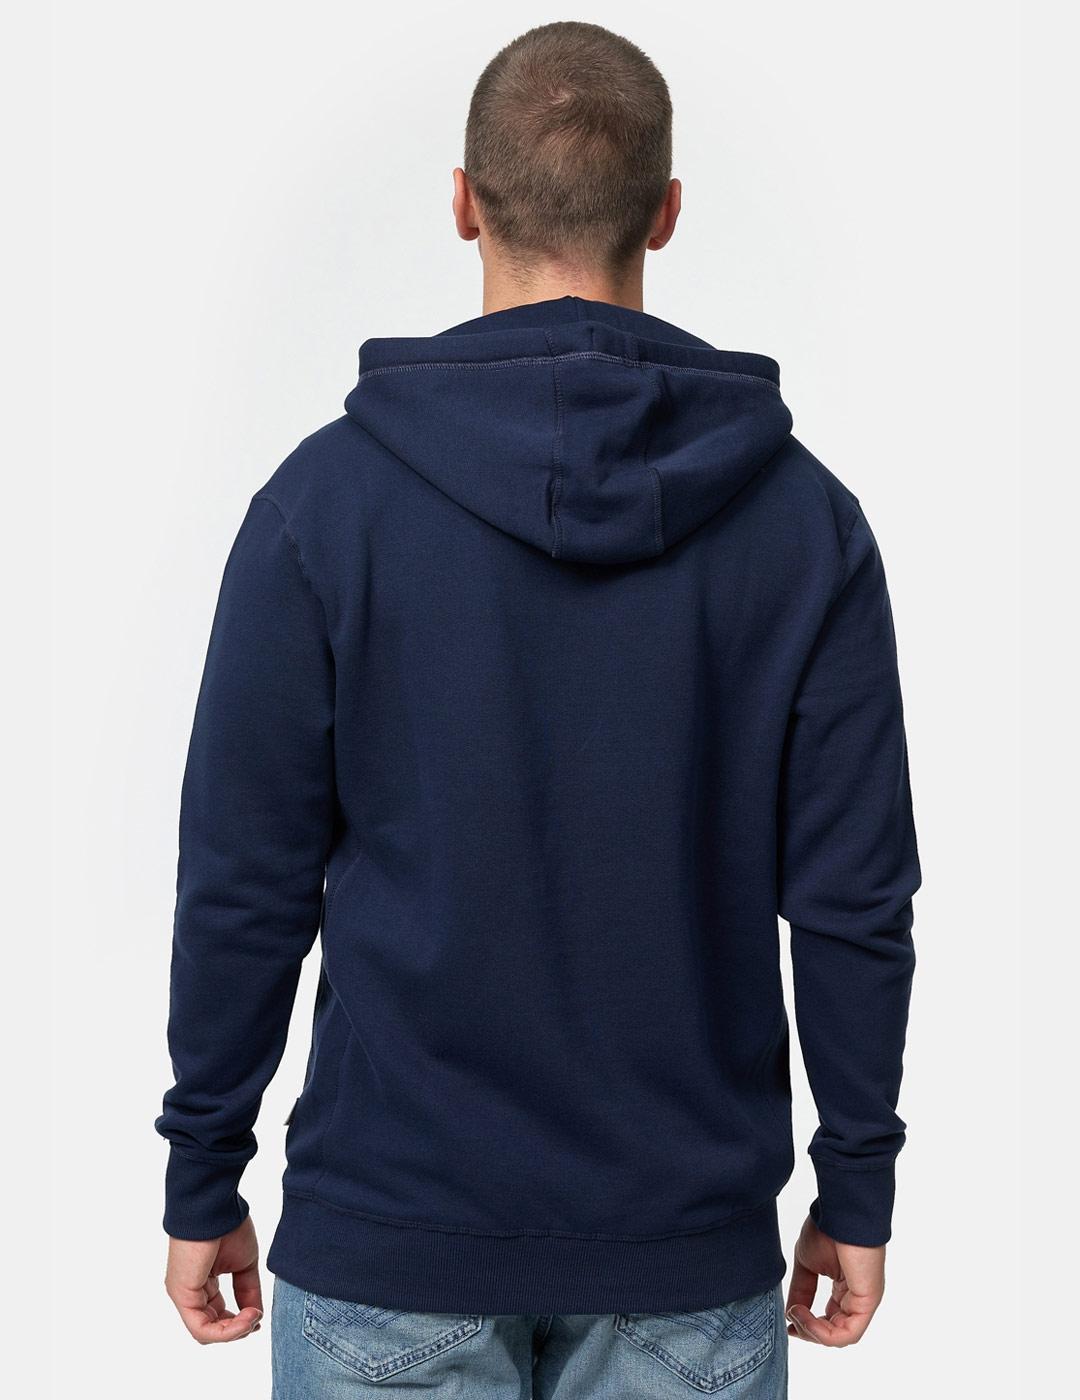 Sudadera Capucha LONSDALE THURNING - Navy/Red/White